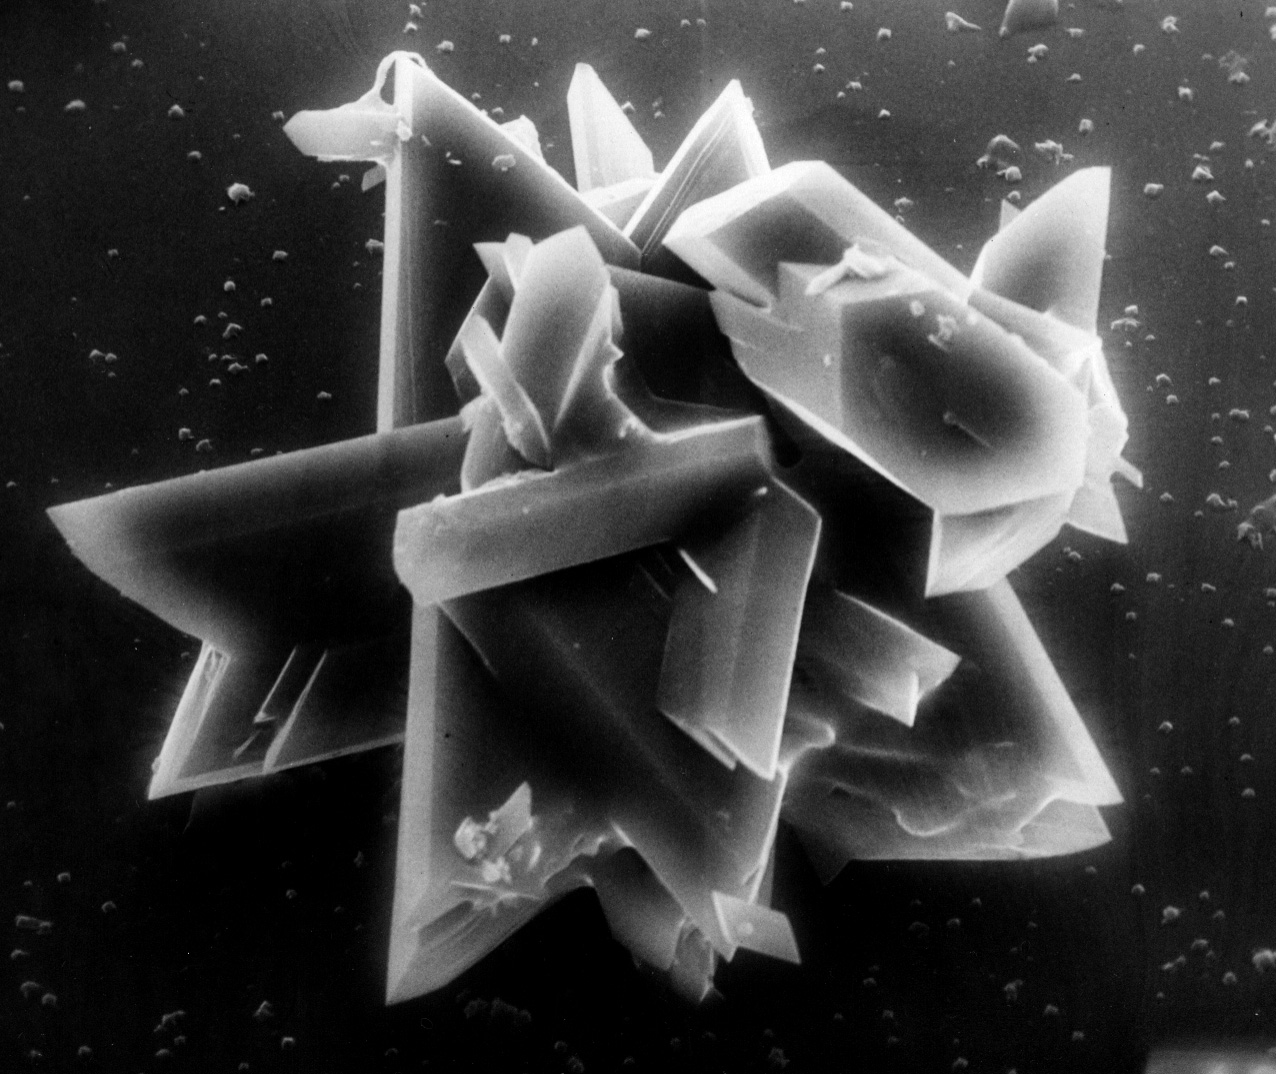 SEM of gypsum crystals grown from the hemihydrate.